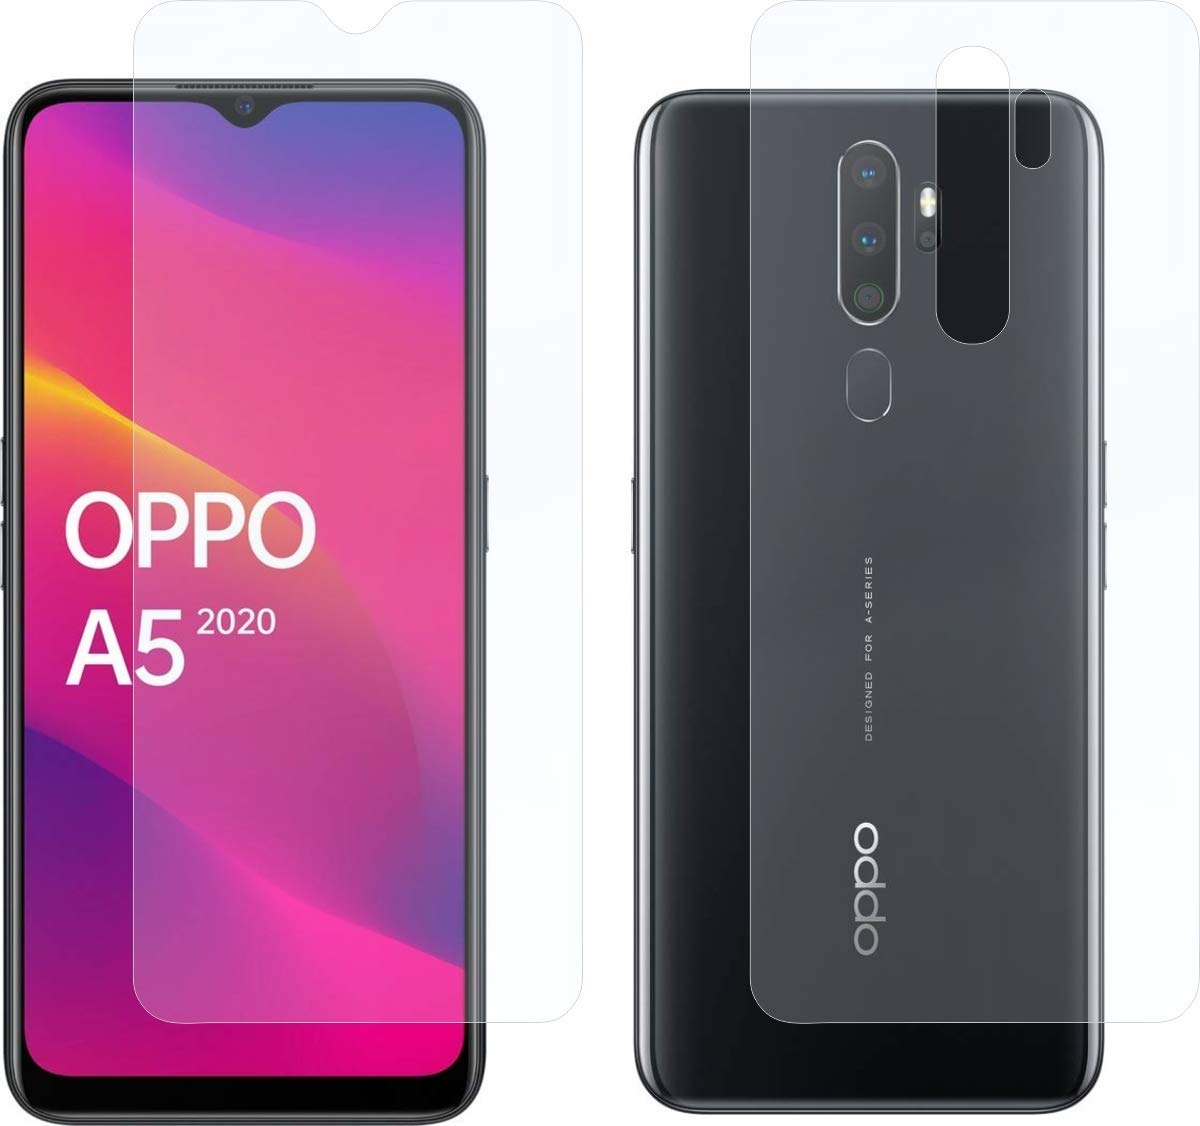 Oppo Mobile Phones - Gadgets of the New Era